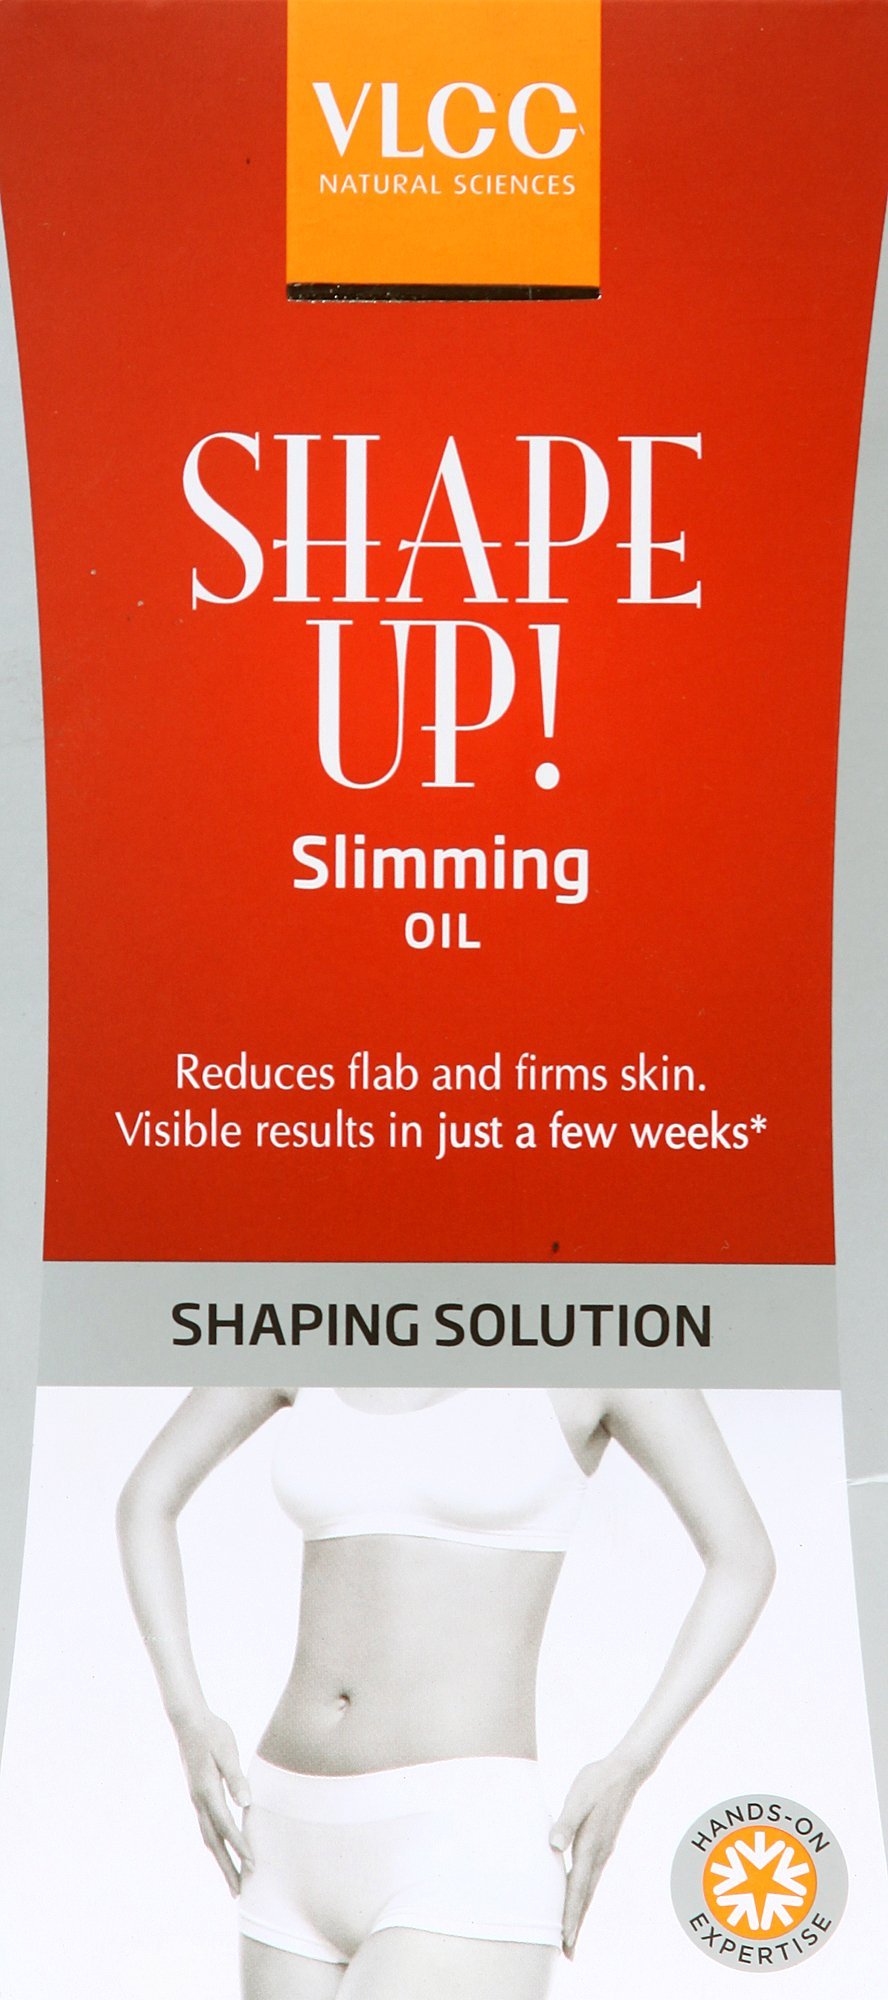 VLCC Natural Sciences Shape Up! Slimming Oil - book cover